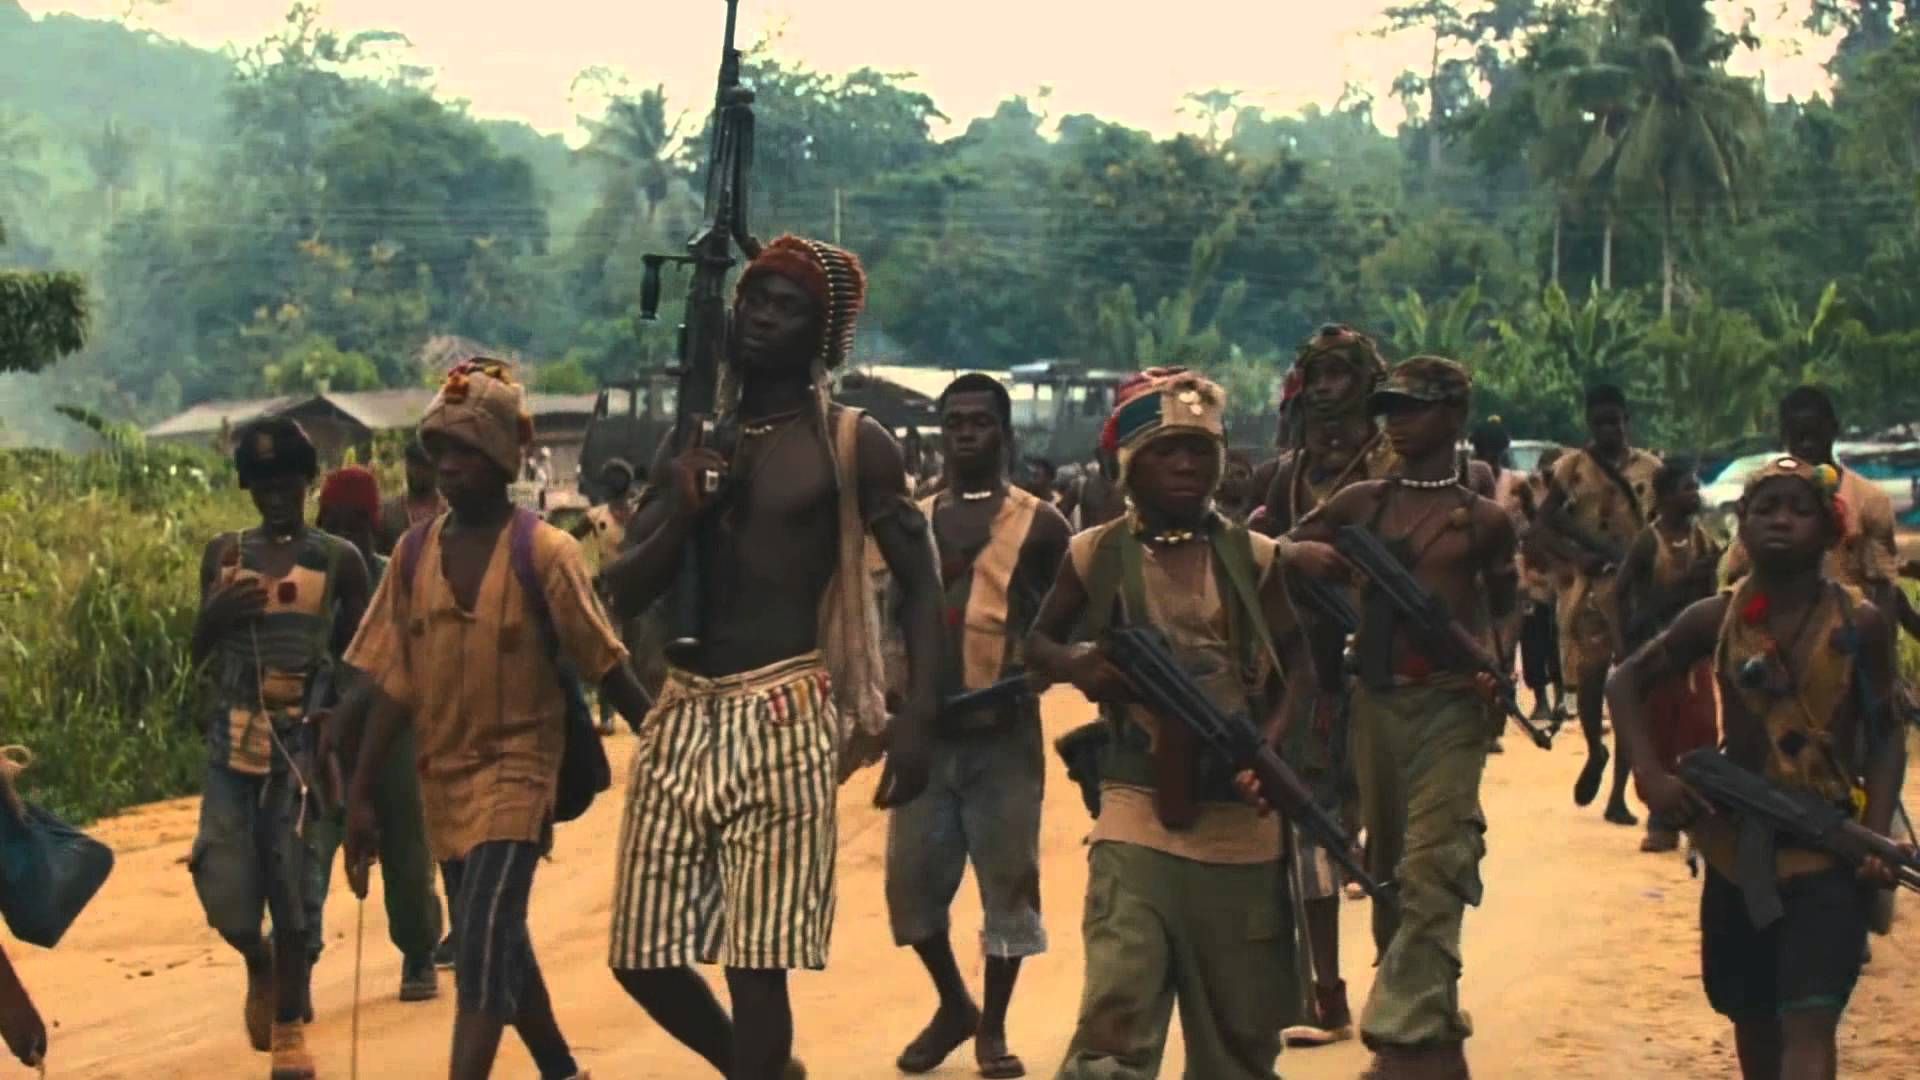 Beasts of No Nation (2015) ideas. beasts of no nation, beast, good on netflix